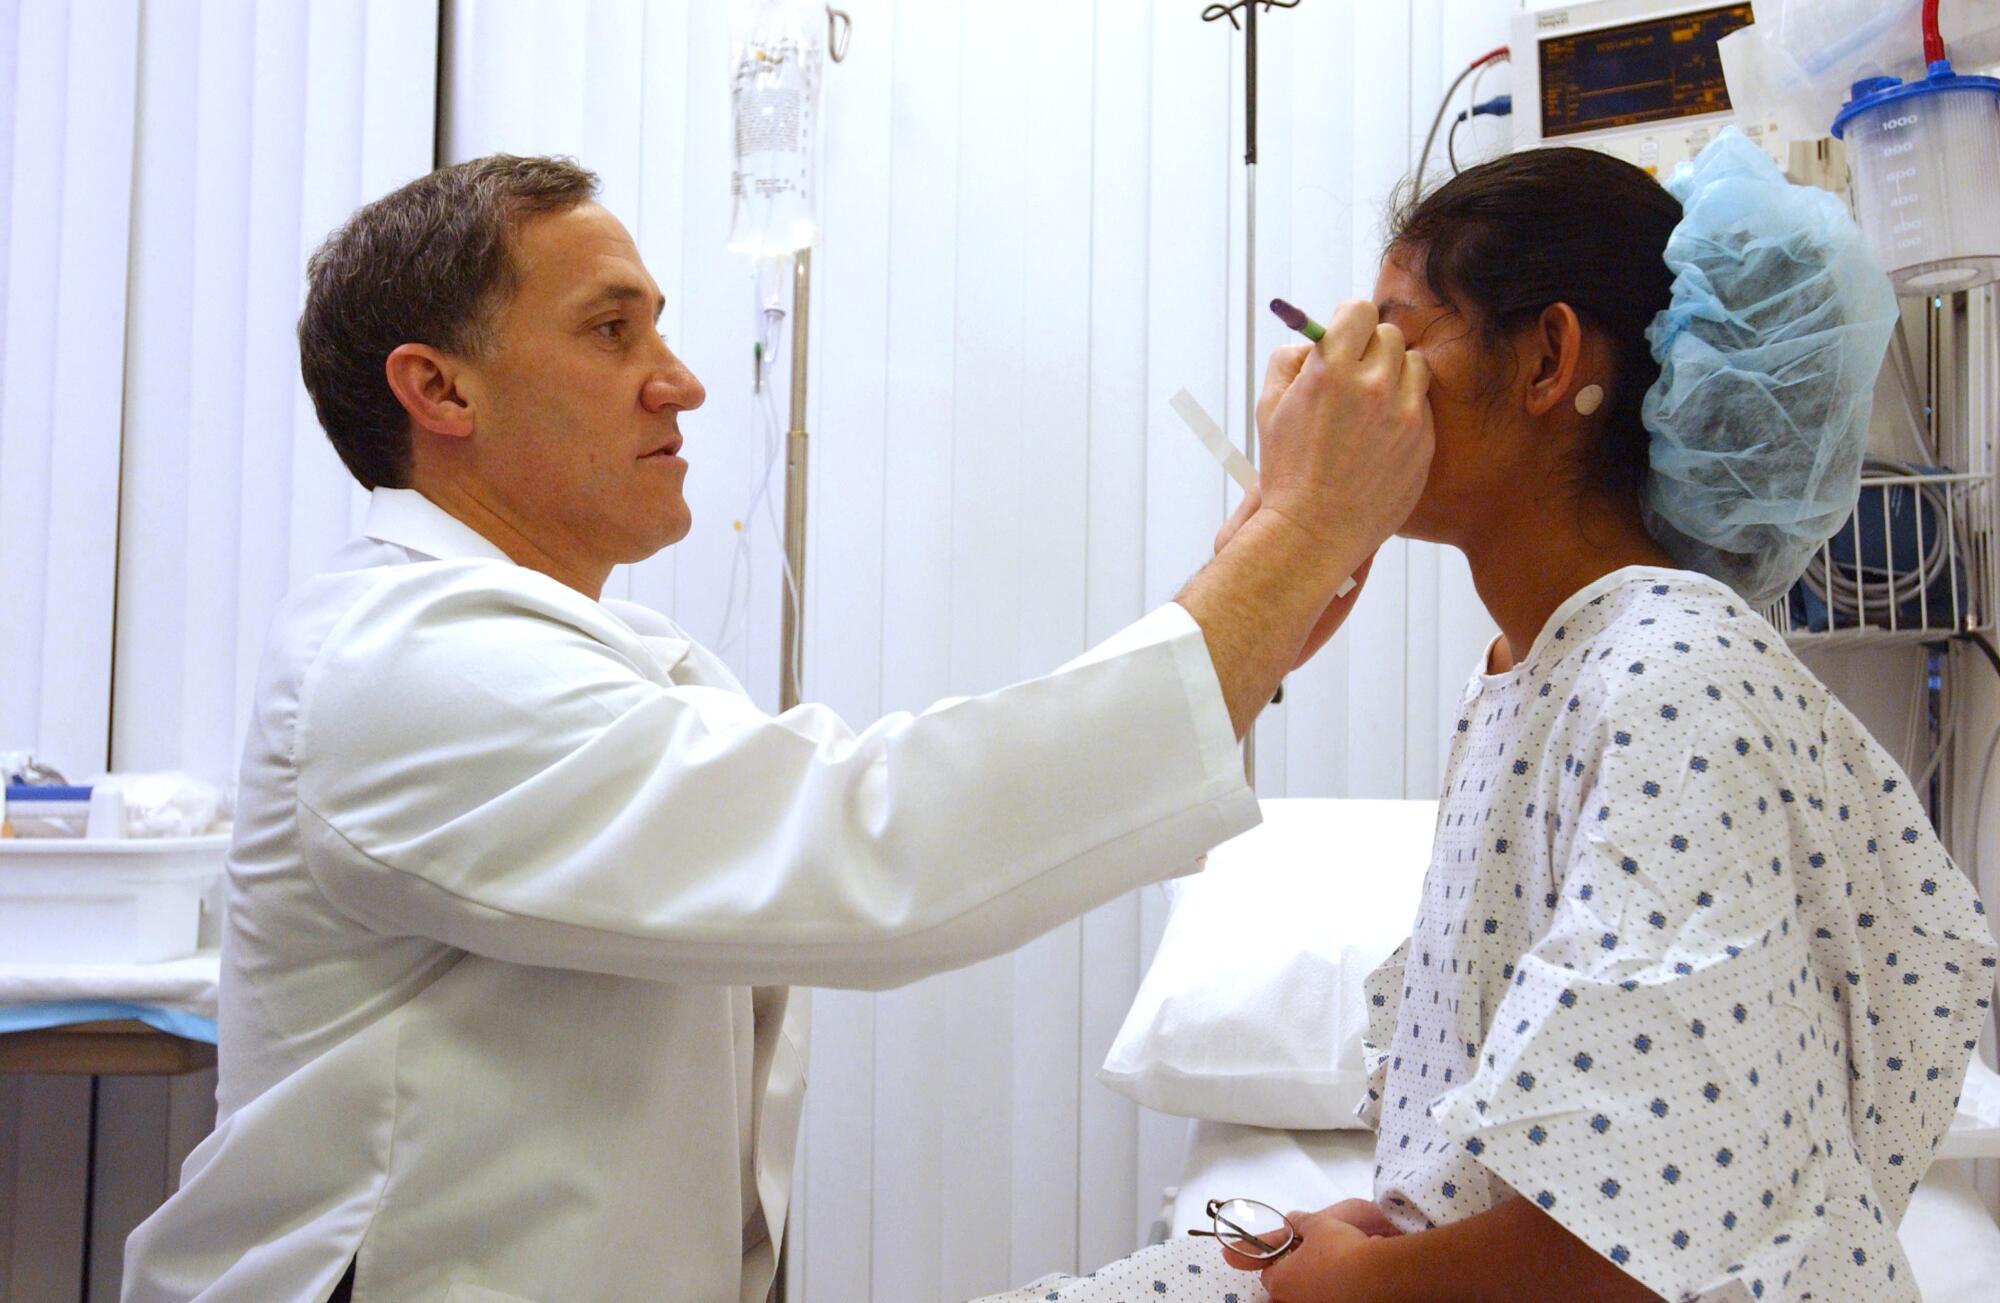 A doctor in a white lab coat marks on the face of a woman in a hospital gown and surgical cap.